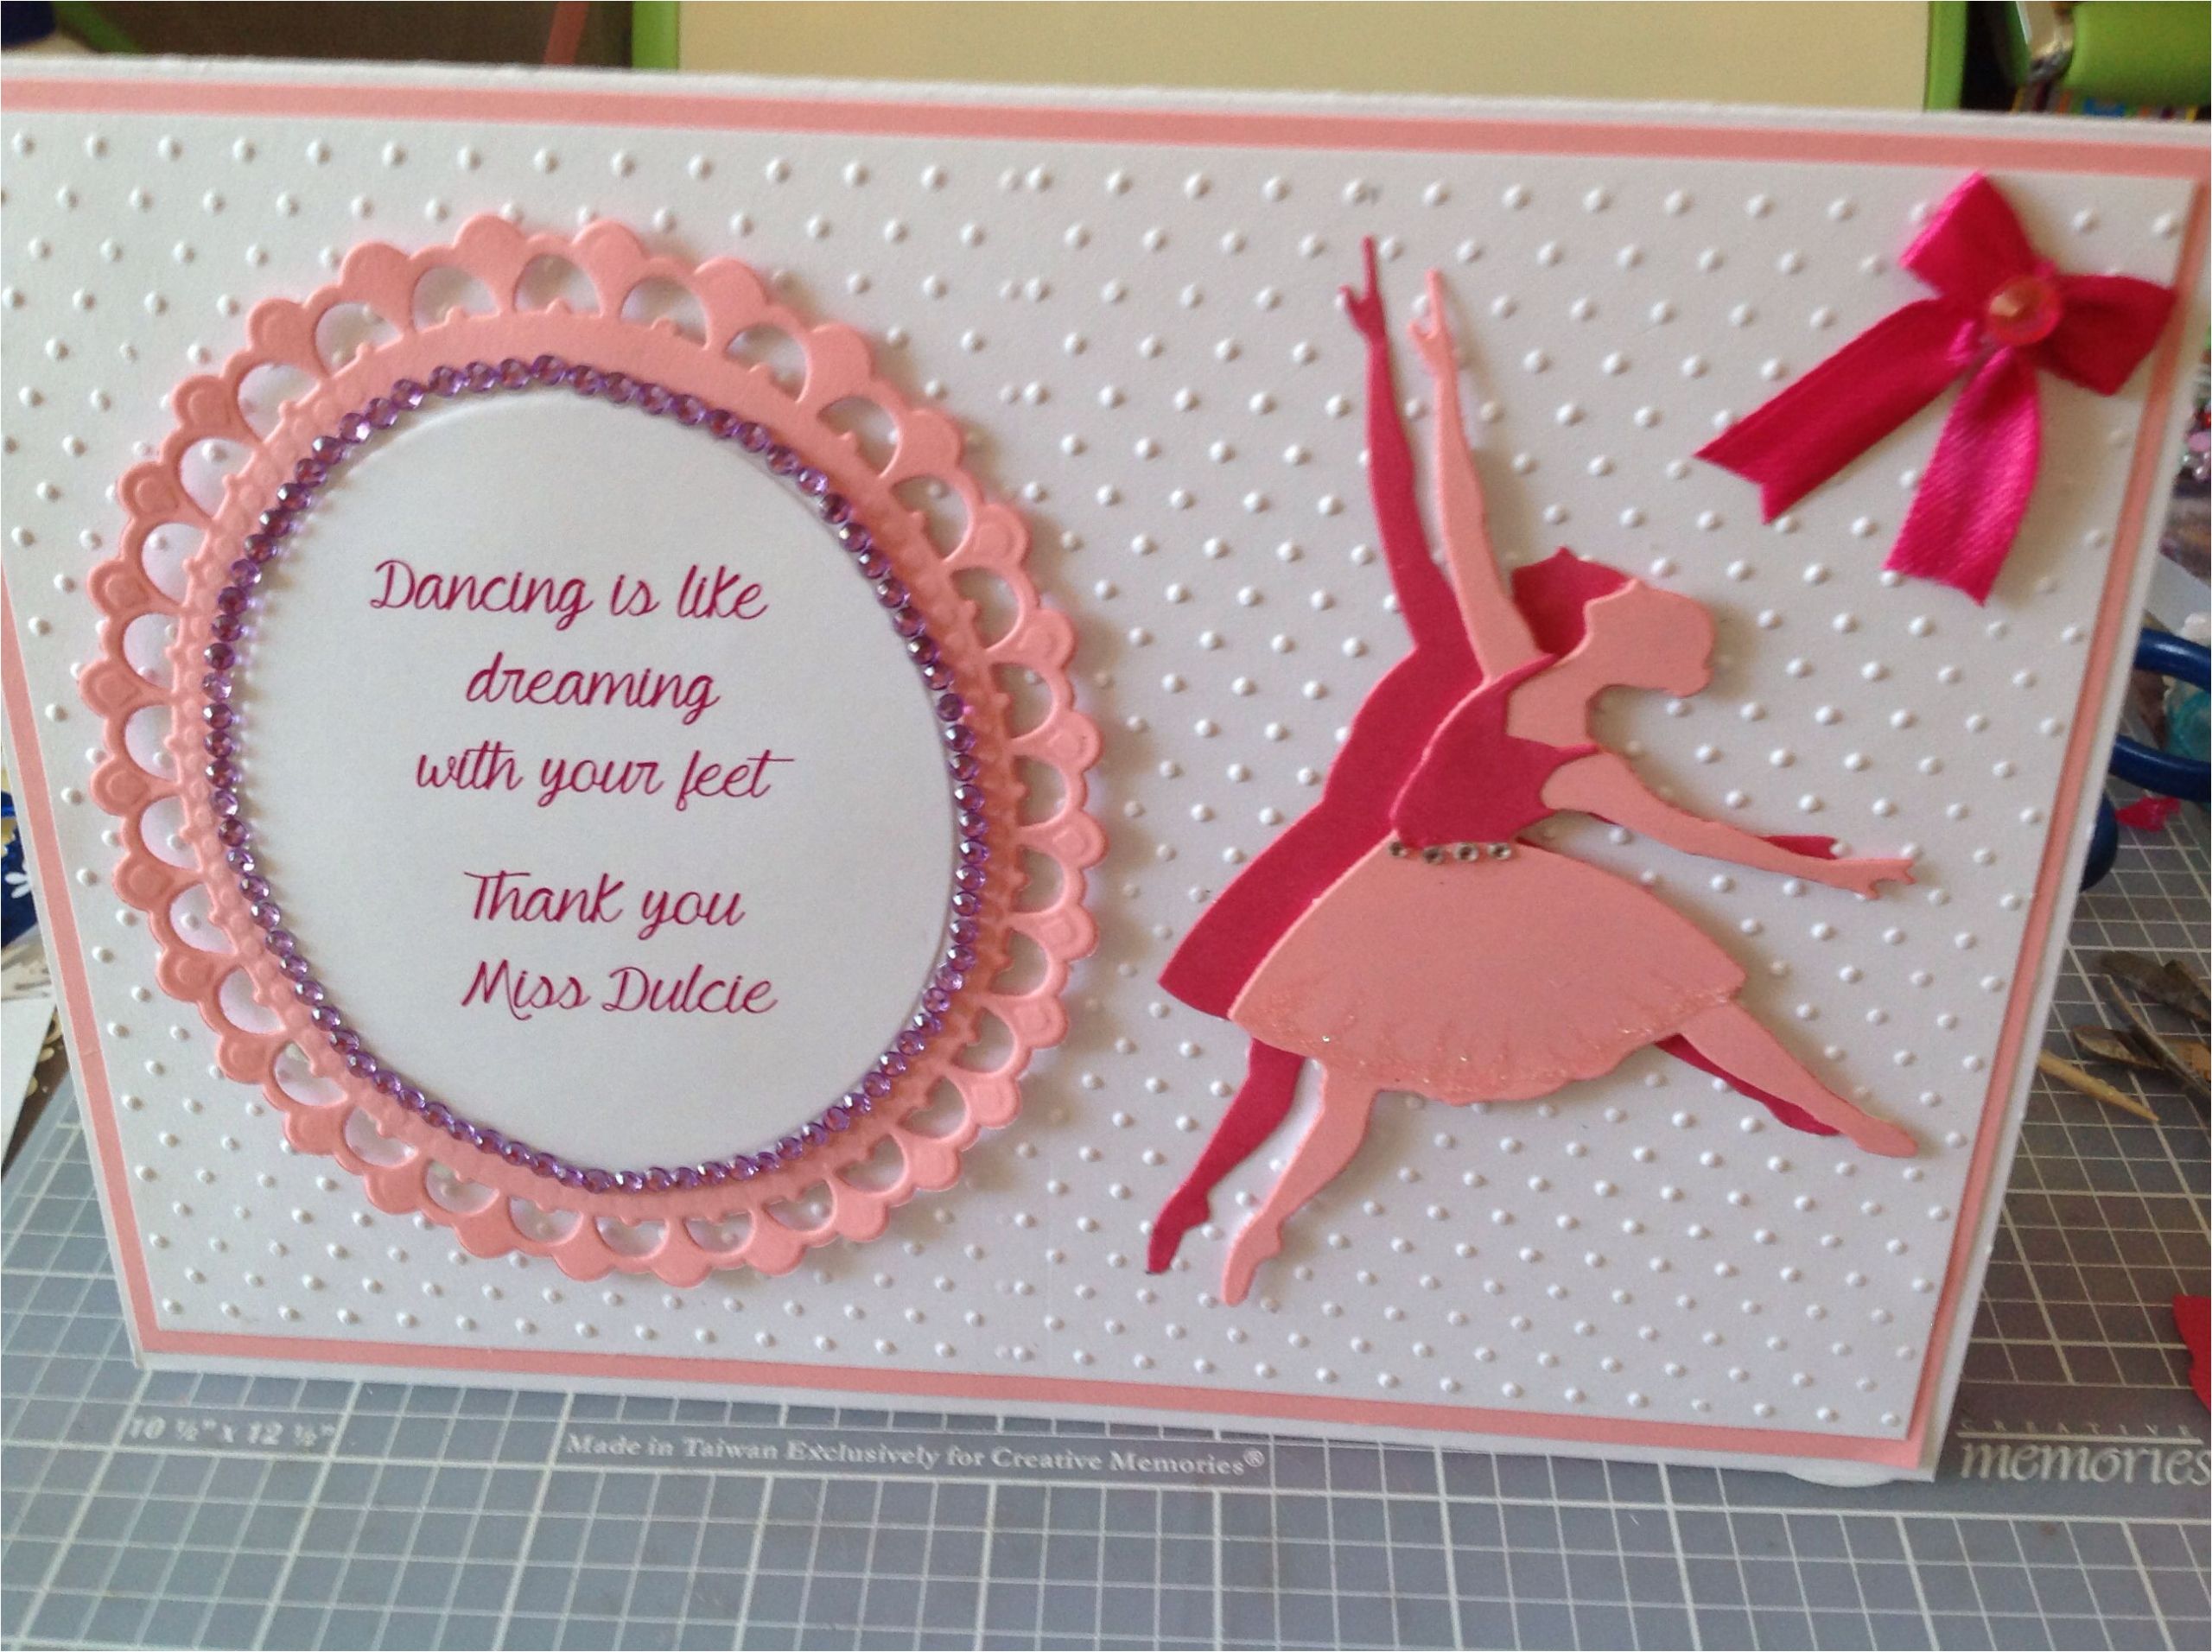 Thank You Dance Teacher Card Thank You Dance Teachers Card with Images Greeting Cards